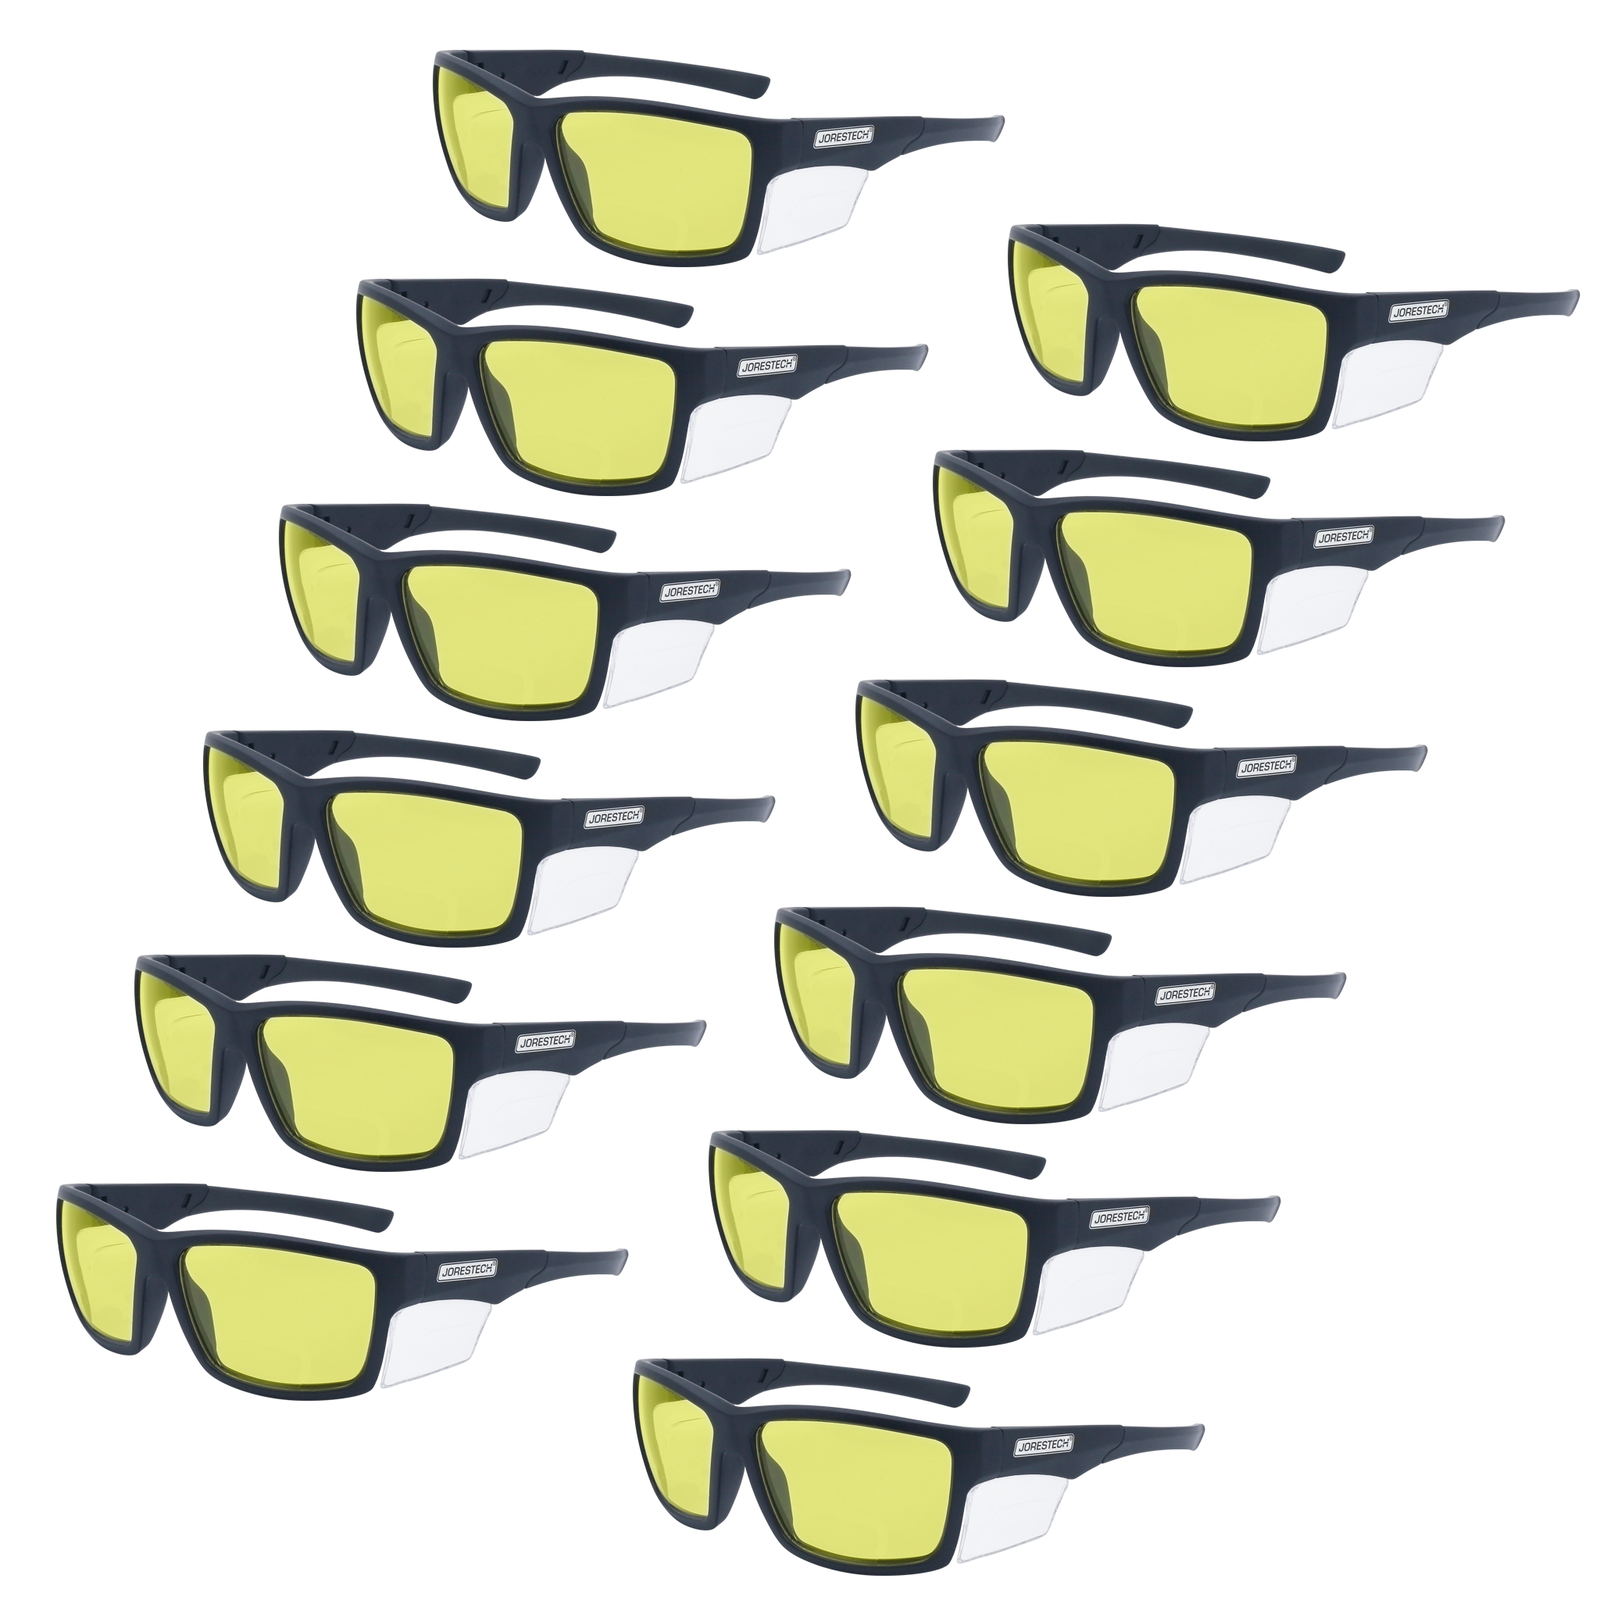 Image shows 12 pairs of yellow JORESTECH safety glasses with transparent side shield for high impact protection. These safety glasses are ANSI compliant and have black frame and yellow polycarbonate lenses. The background of the image is white